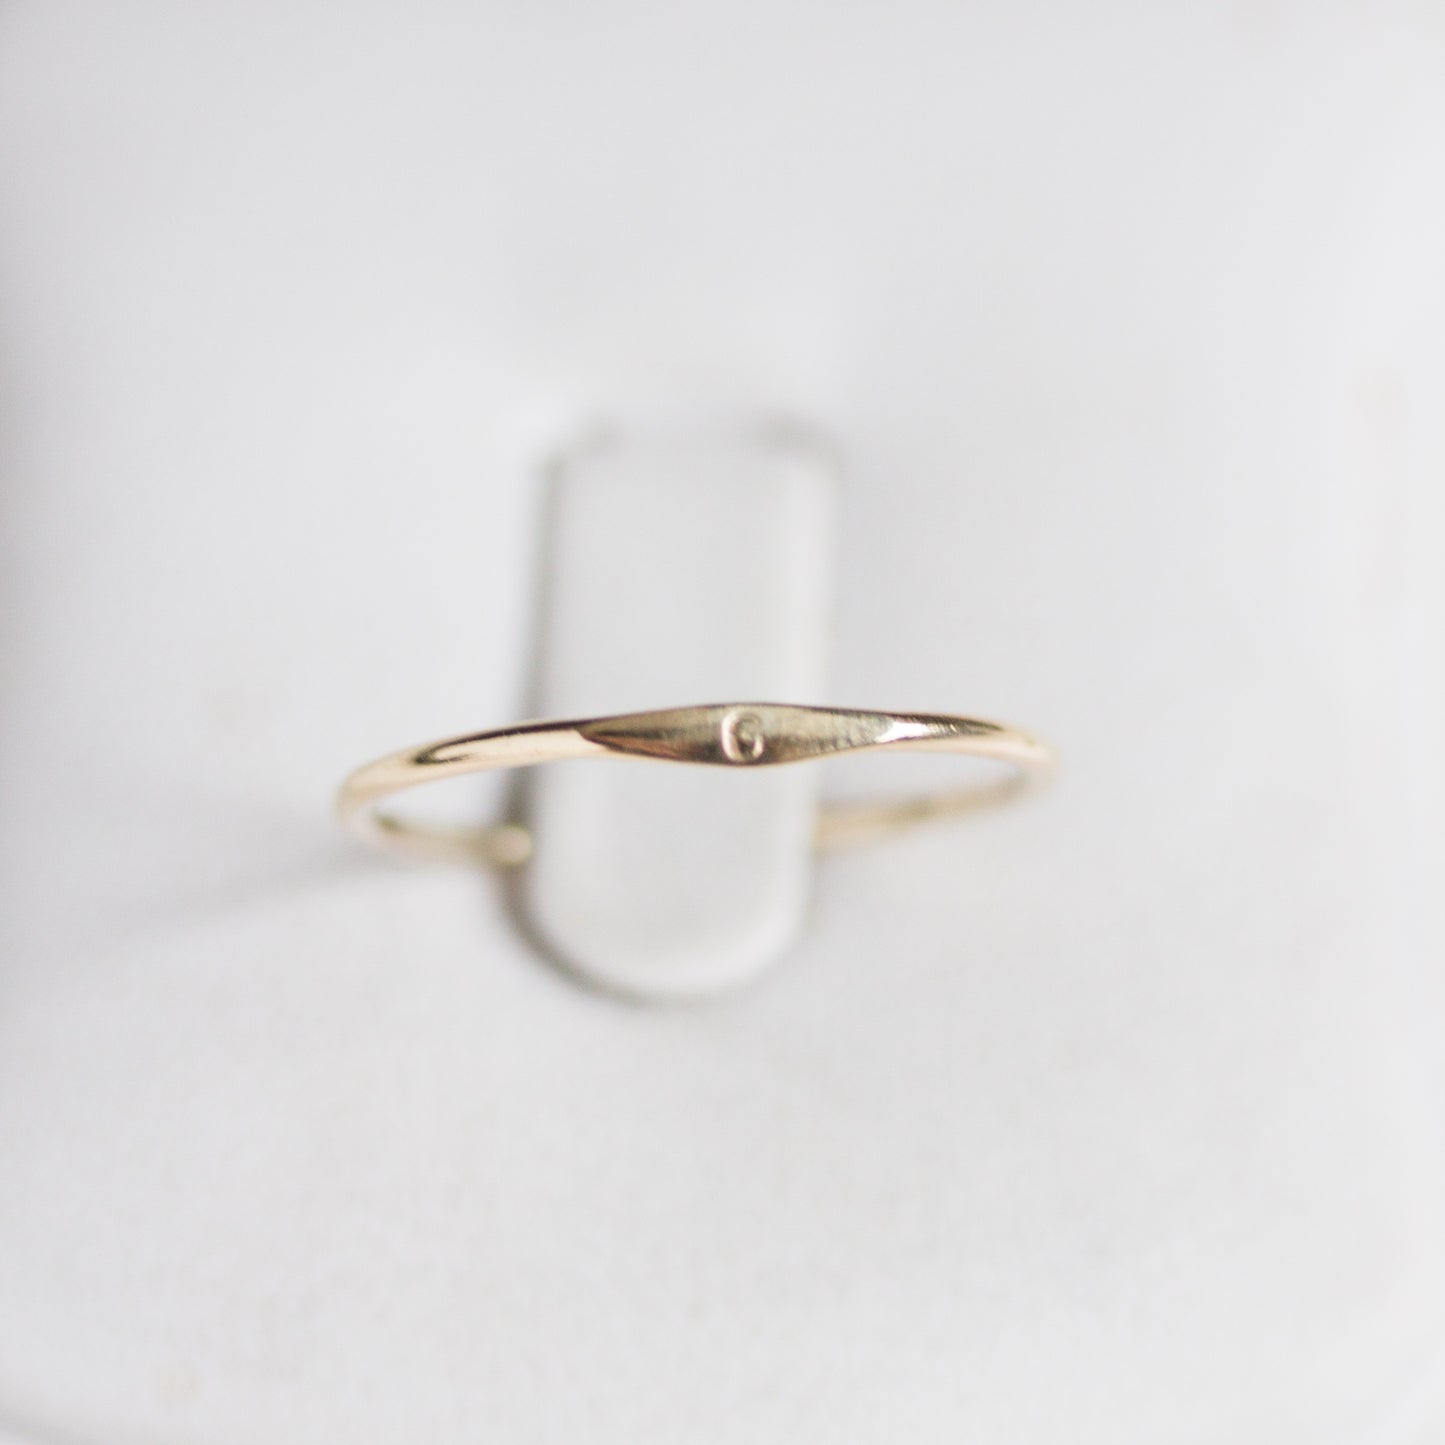 Monogram ring with hand stamped initial, stackable 9k gold ring